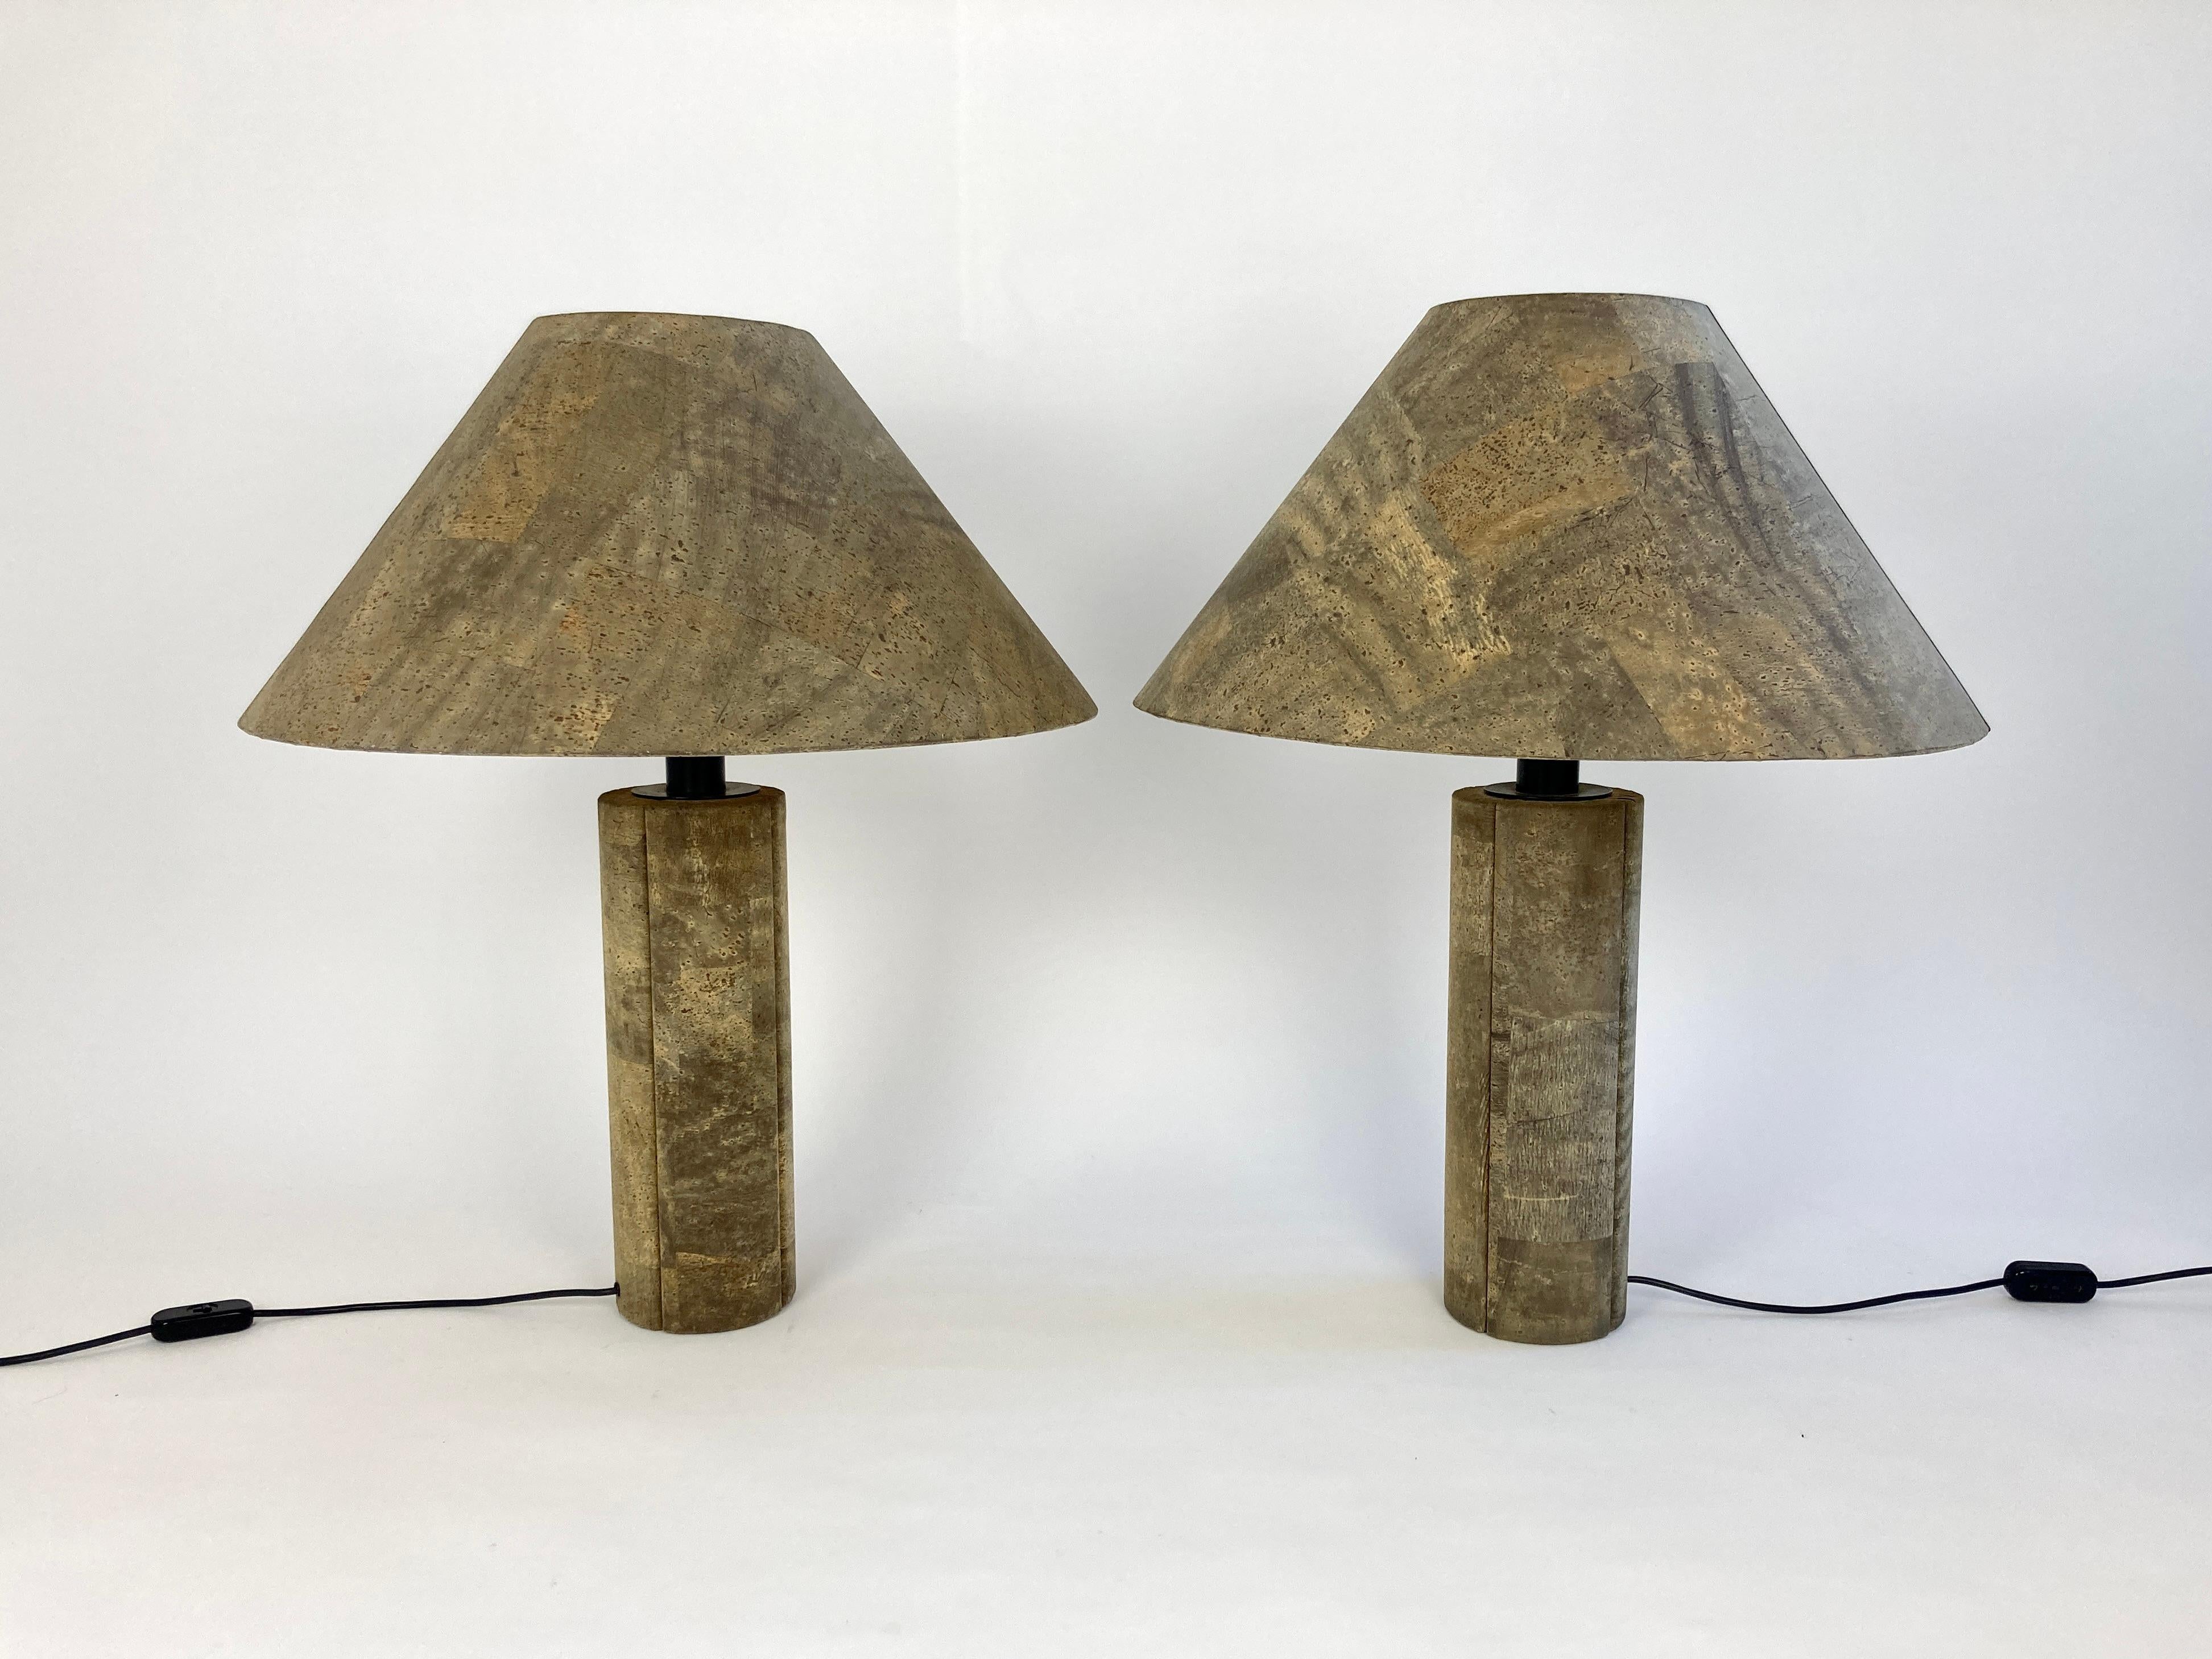 Pair of huge iconic cork table lamps designed by Wilhelm Zanoth and Ingo Maurer in 1974. 

Cylindrical base and and conical shade covered in thin slices of cork veneer giving a wonderful natural minimalist look.

The lamp's sheer size make it